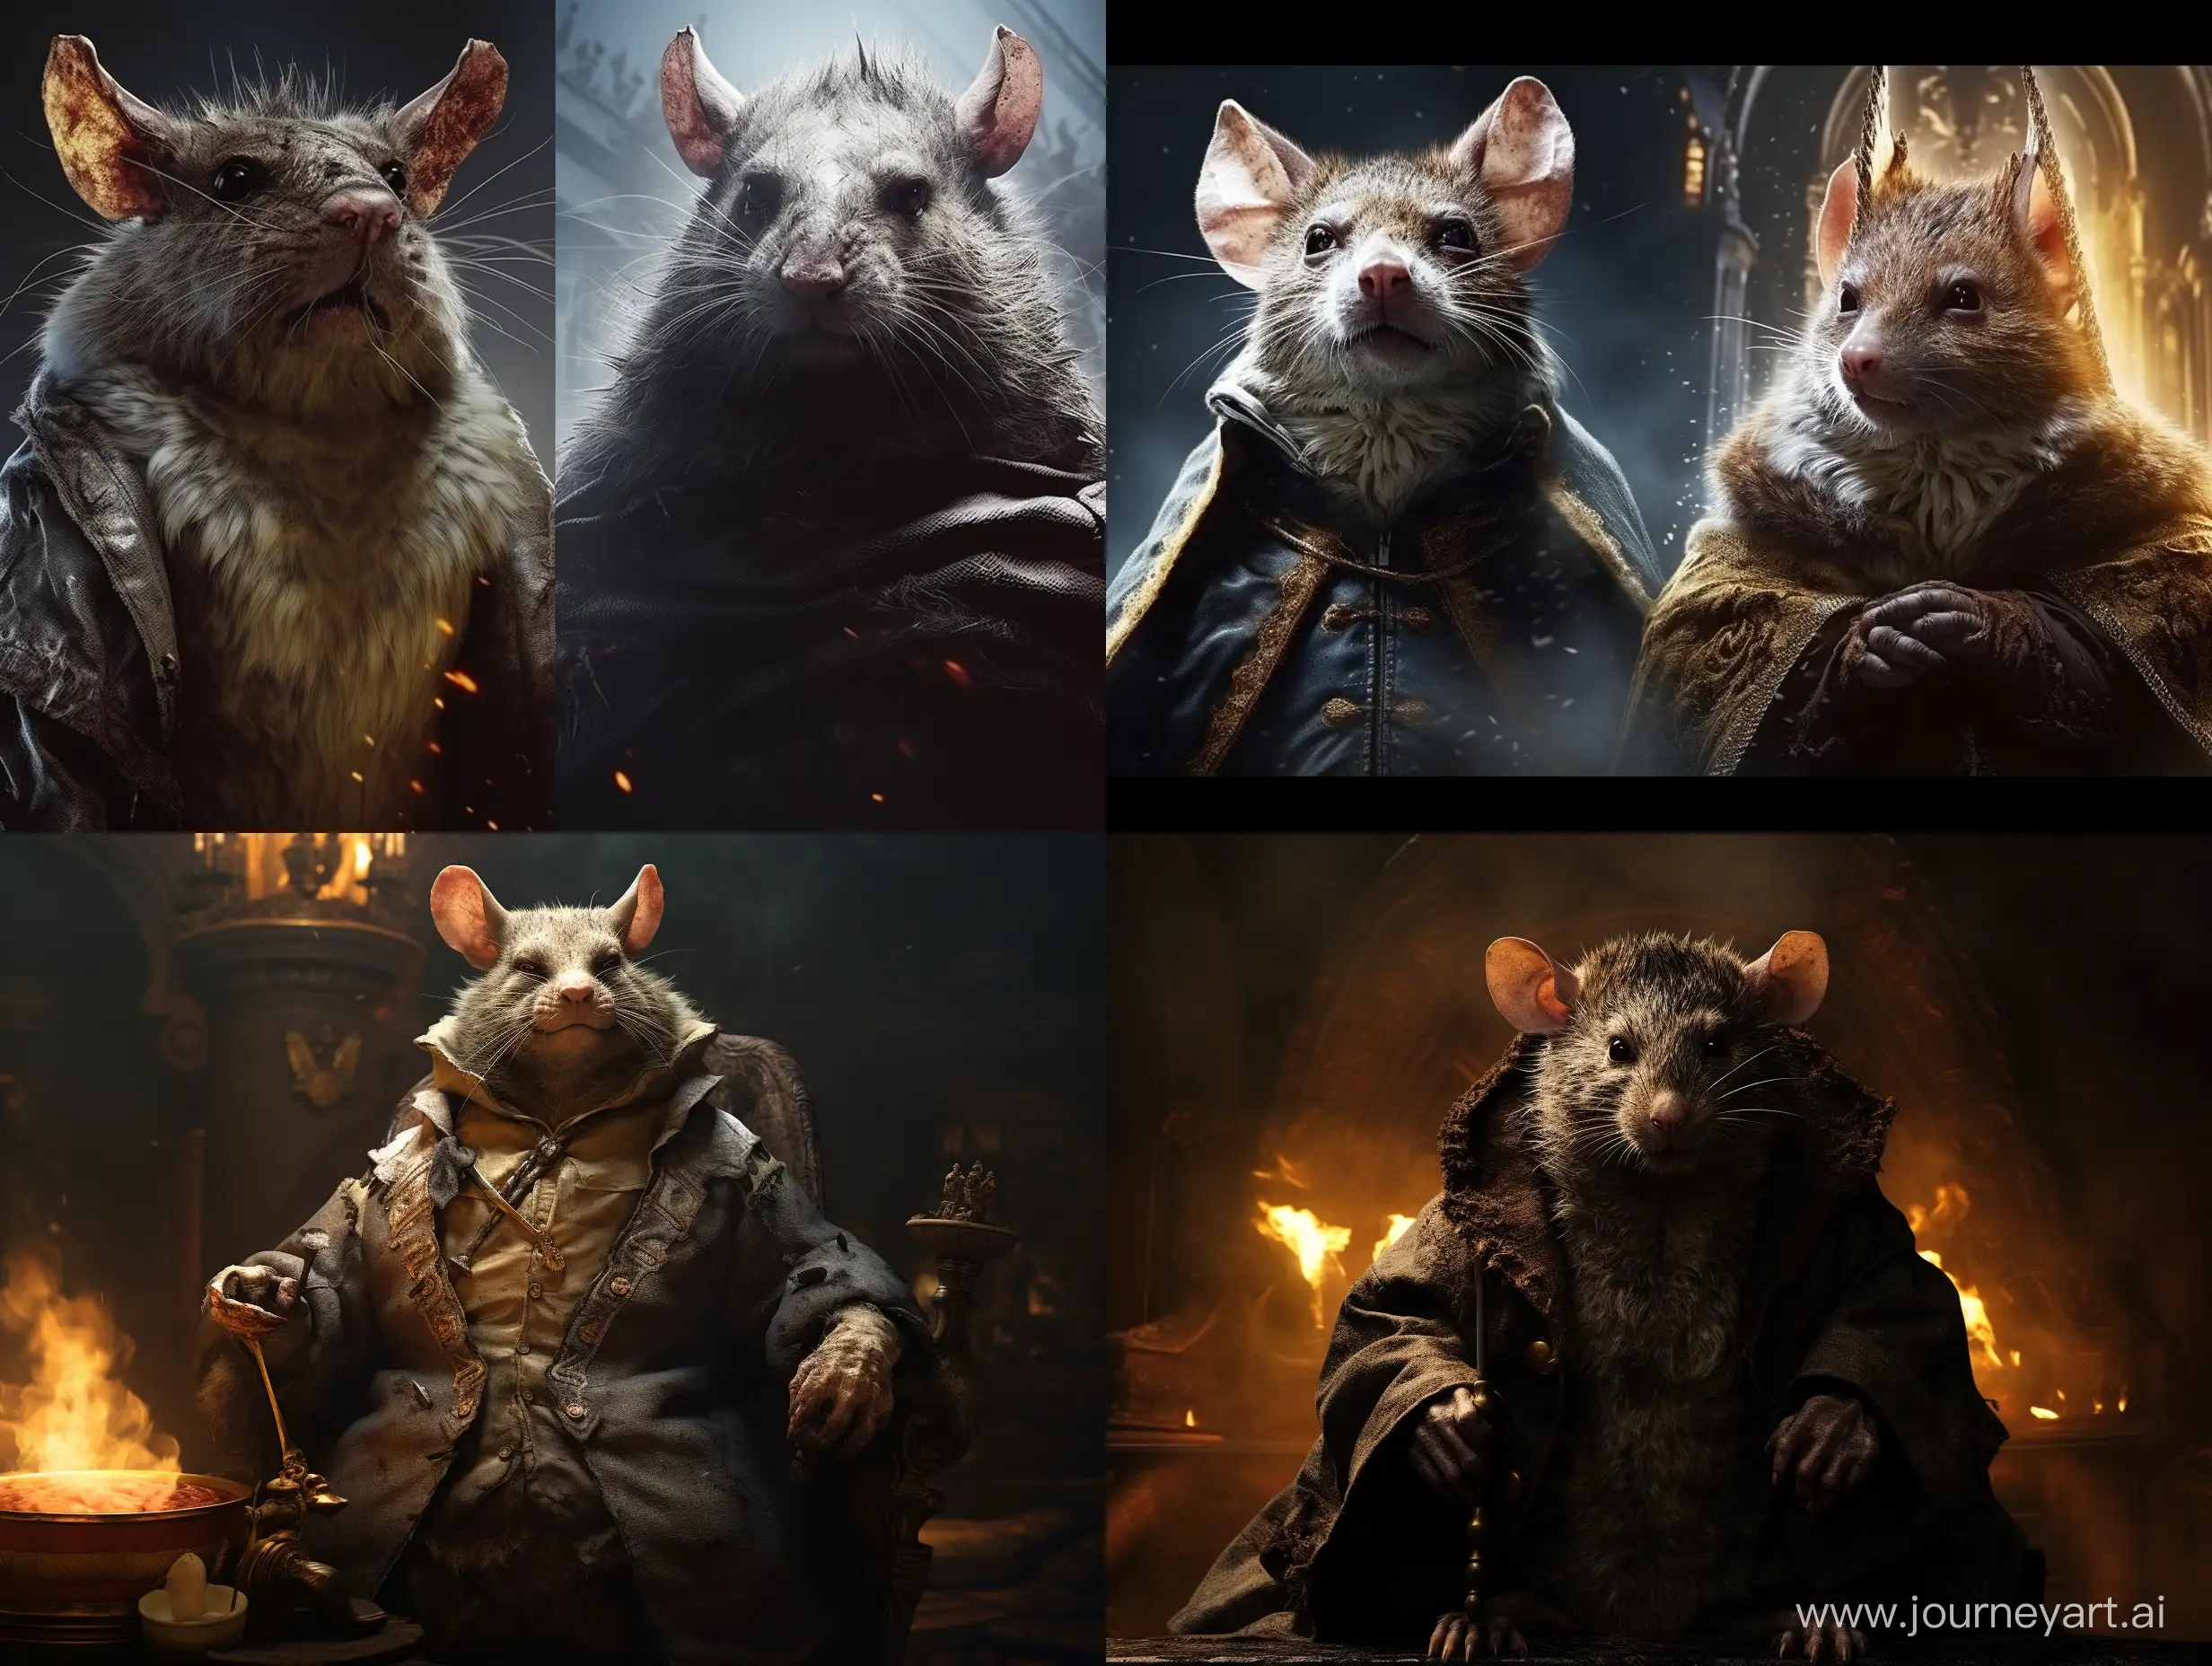 Transformation-of-a-Man-into-the-Rat-King